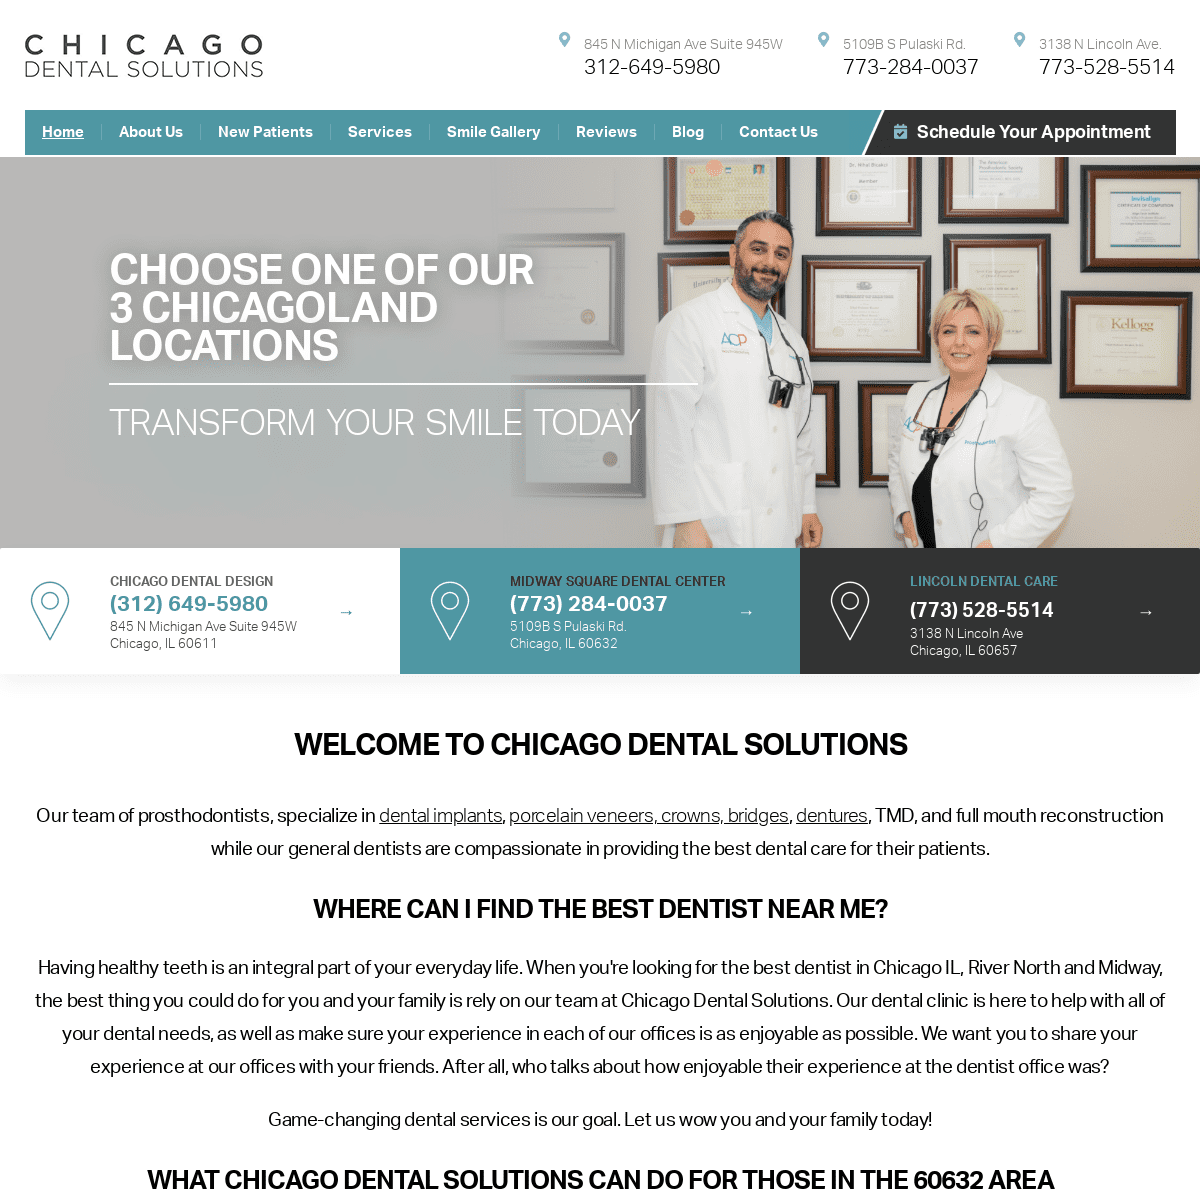 A complete backup of https://chicagodentalsolutions.com